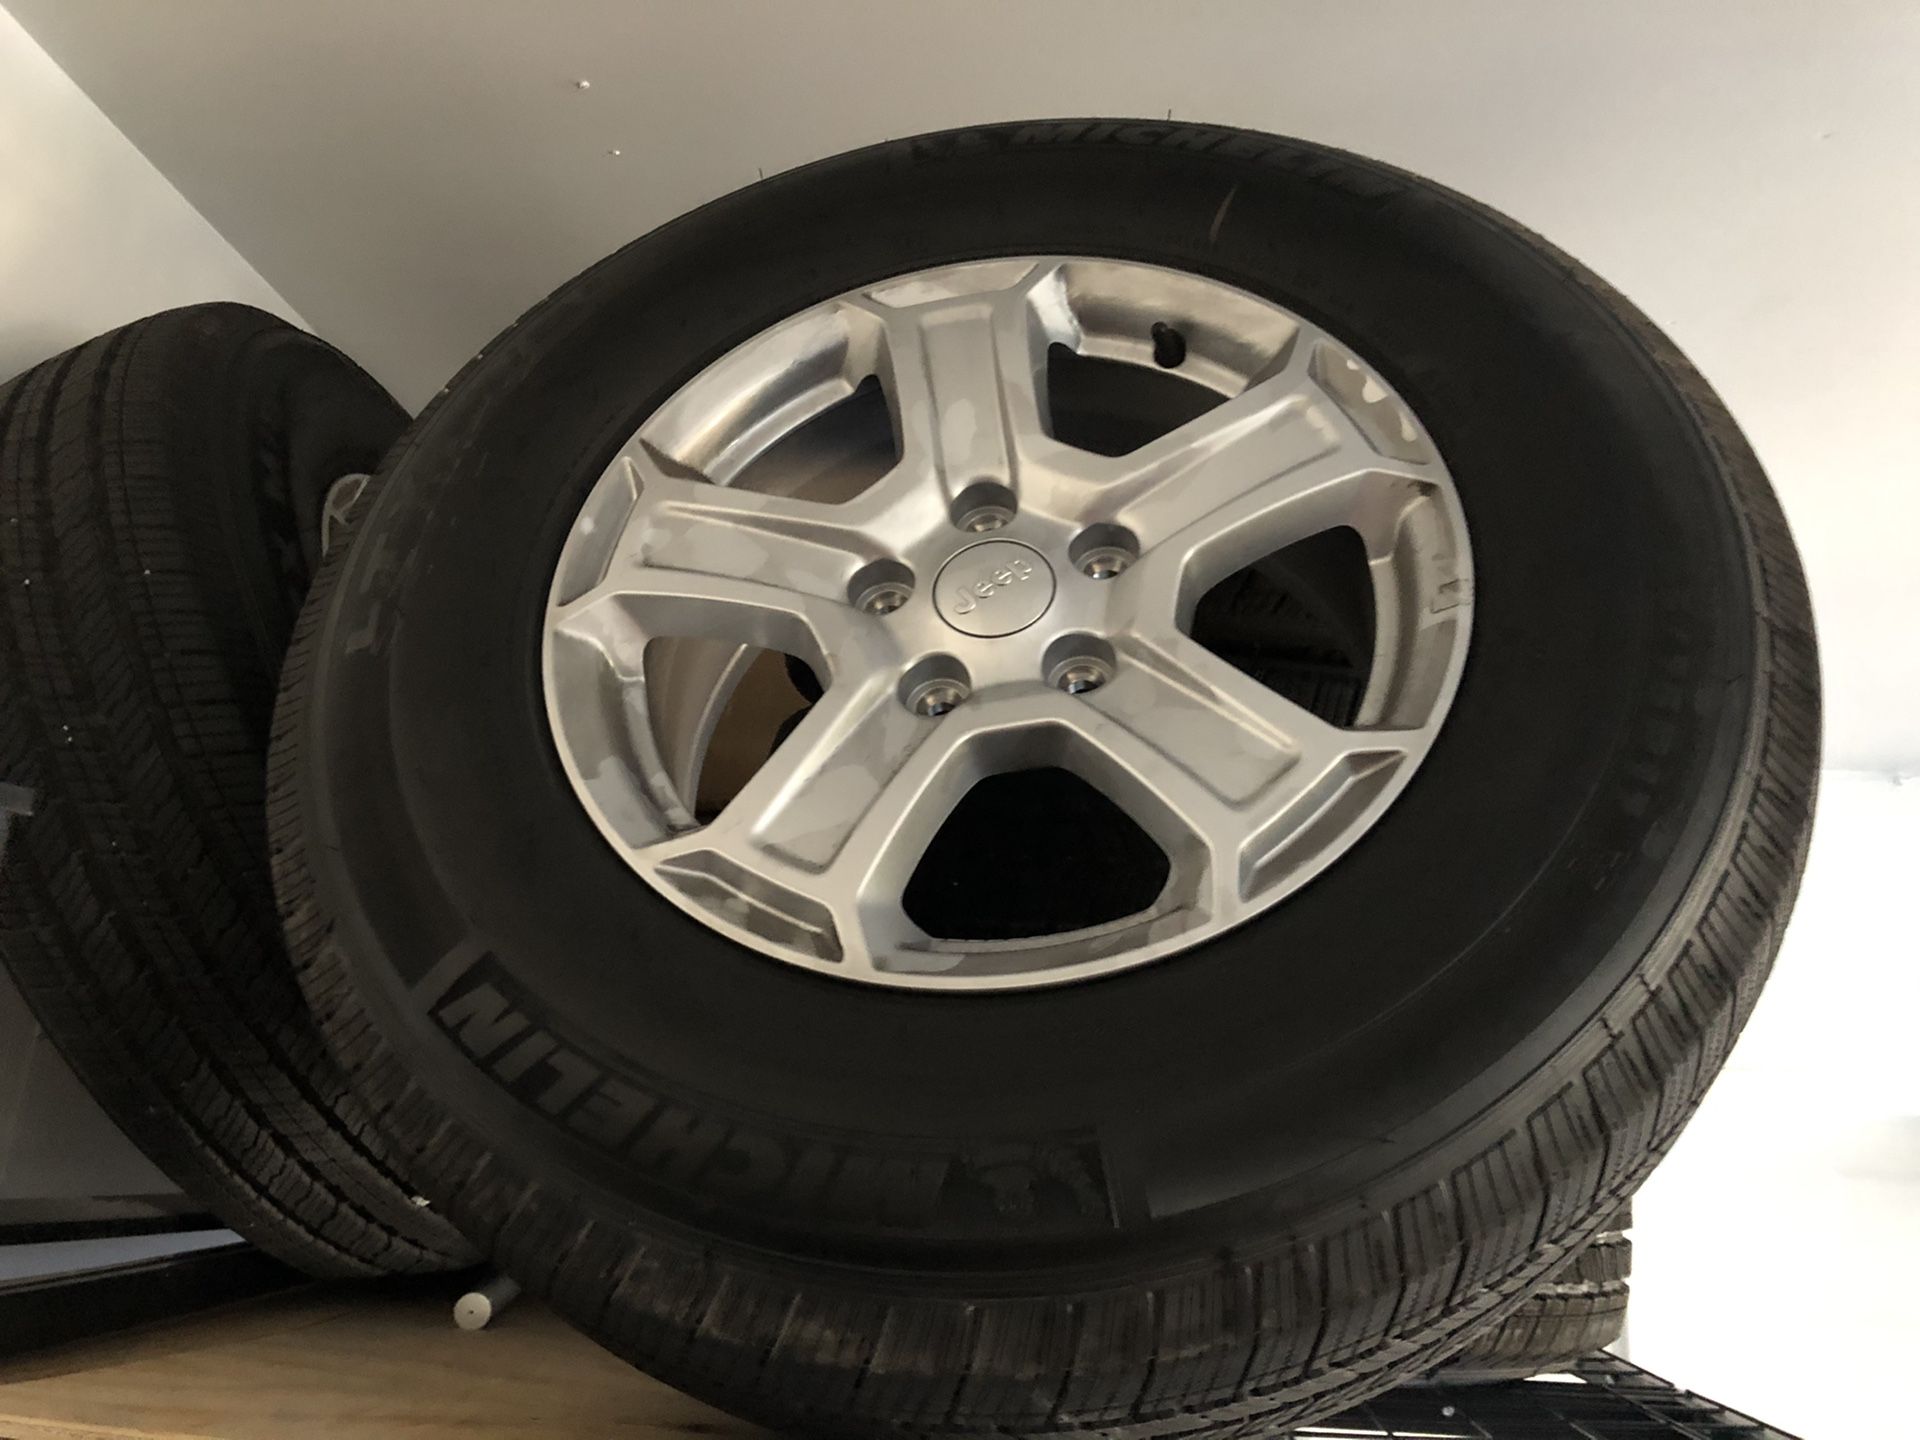 Jeep Wrangler wheels and tires (5 of them) - only 600 miles on them.